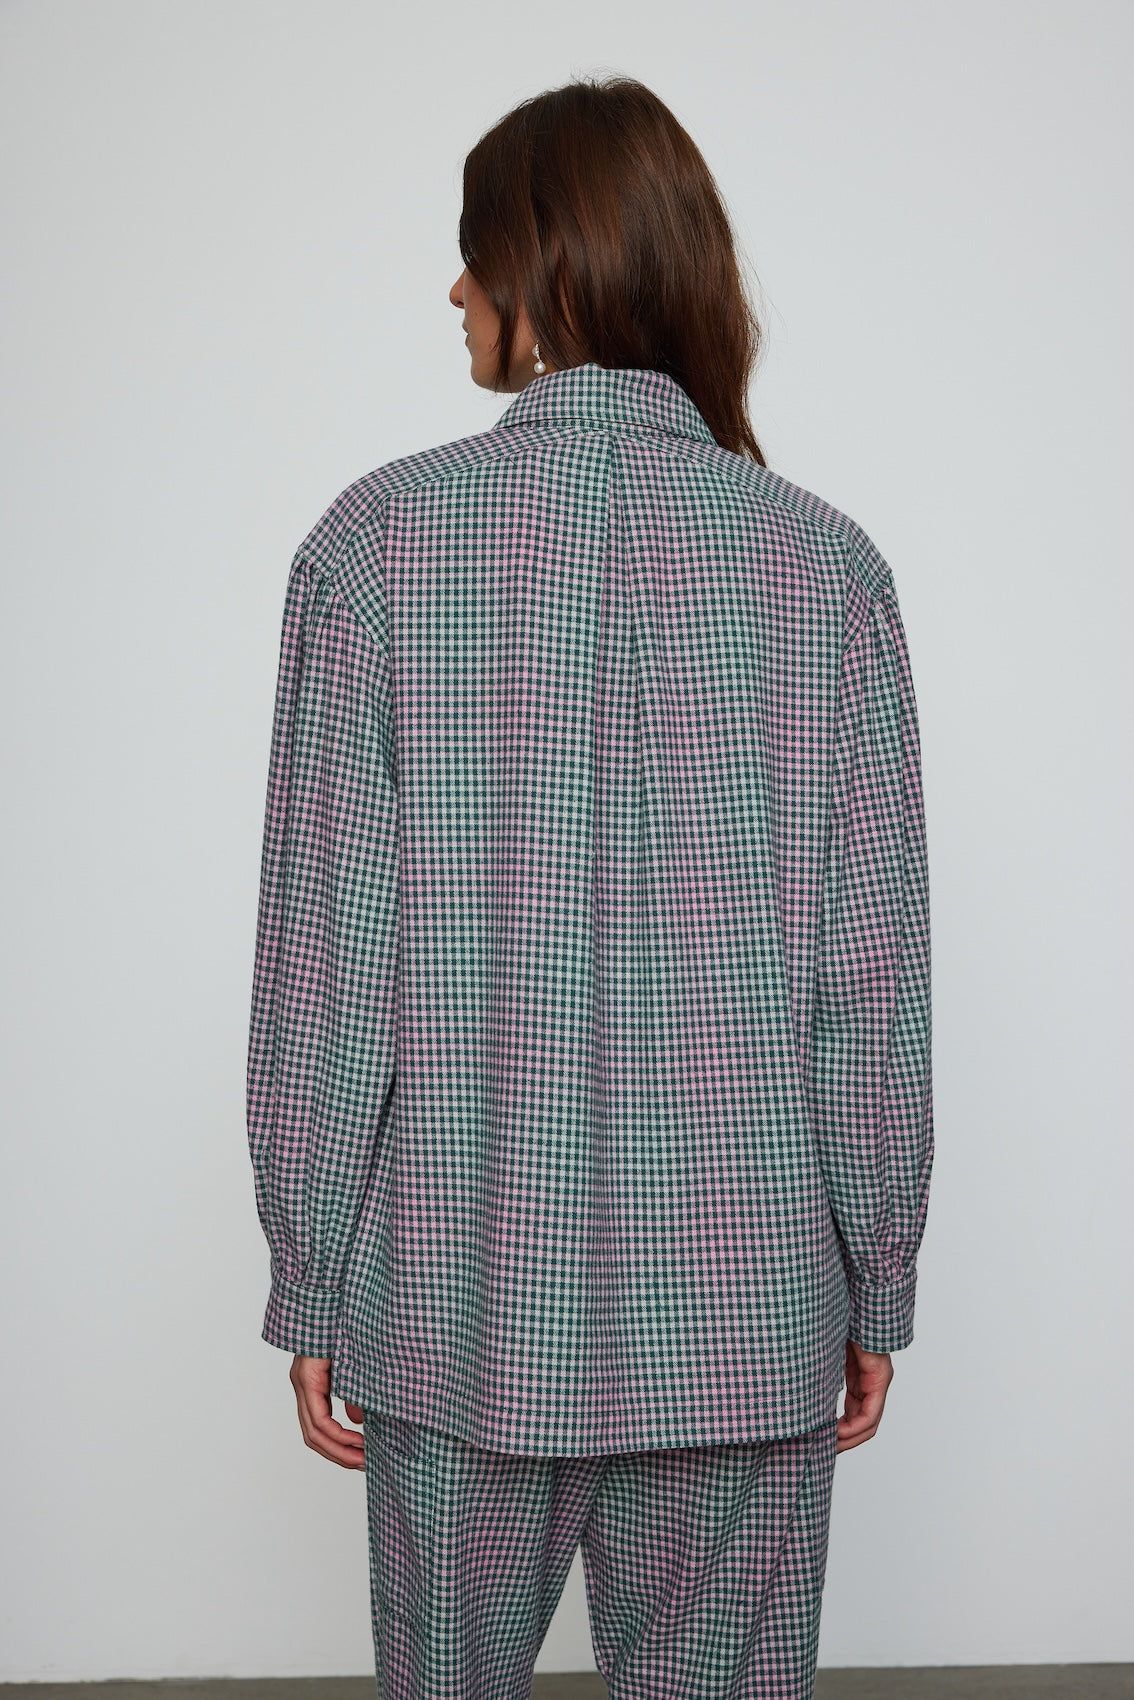 Caro Editions Hannah shirt in soft cotton flannel. The shirt features an oversized fit, big sleeves, and buttons at the front. Style it with matching Hannah pants or jeans, or wear it open over a t-shirt or tank top.